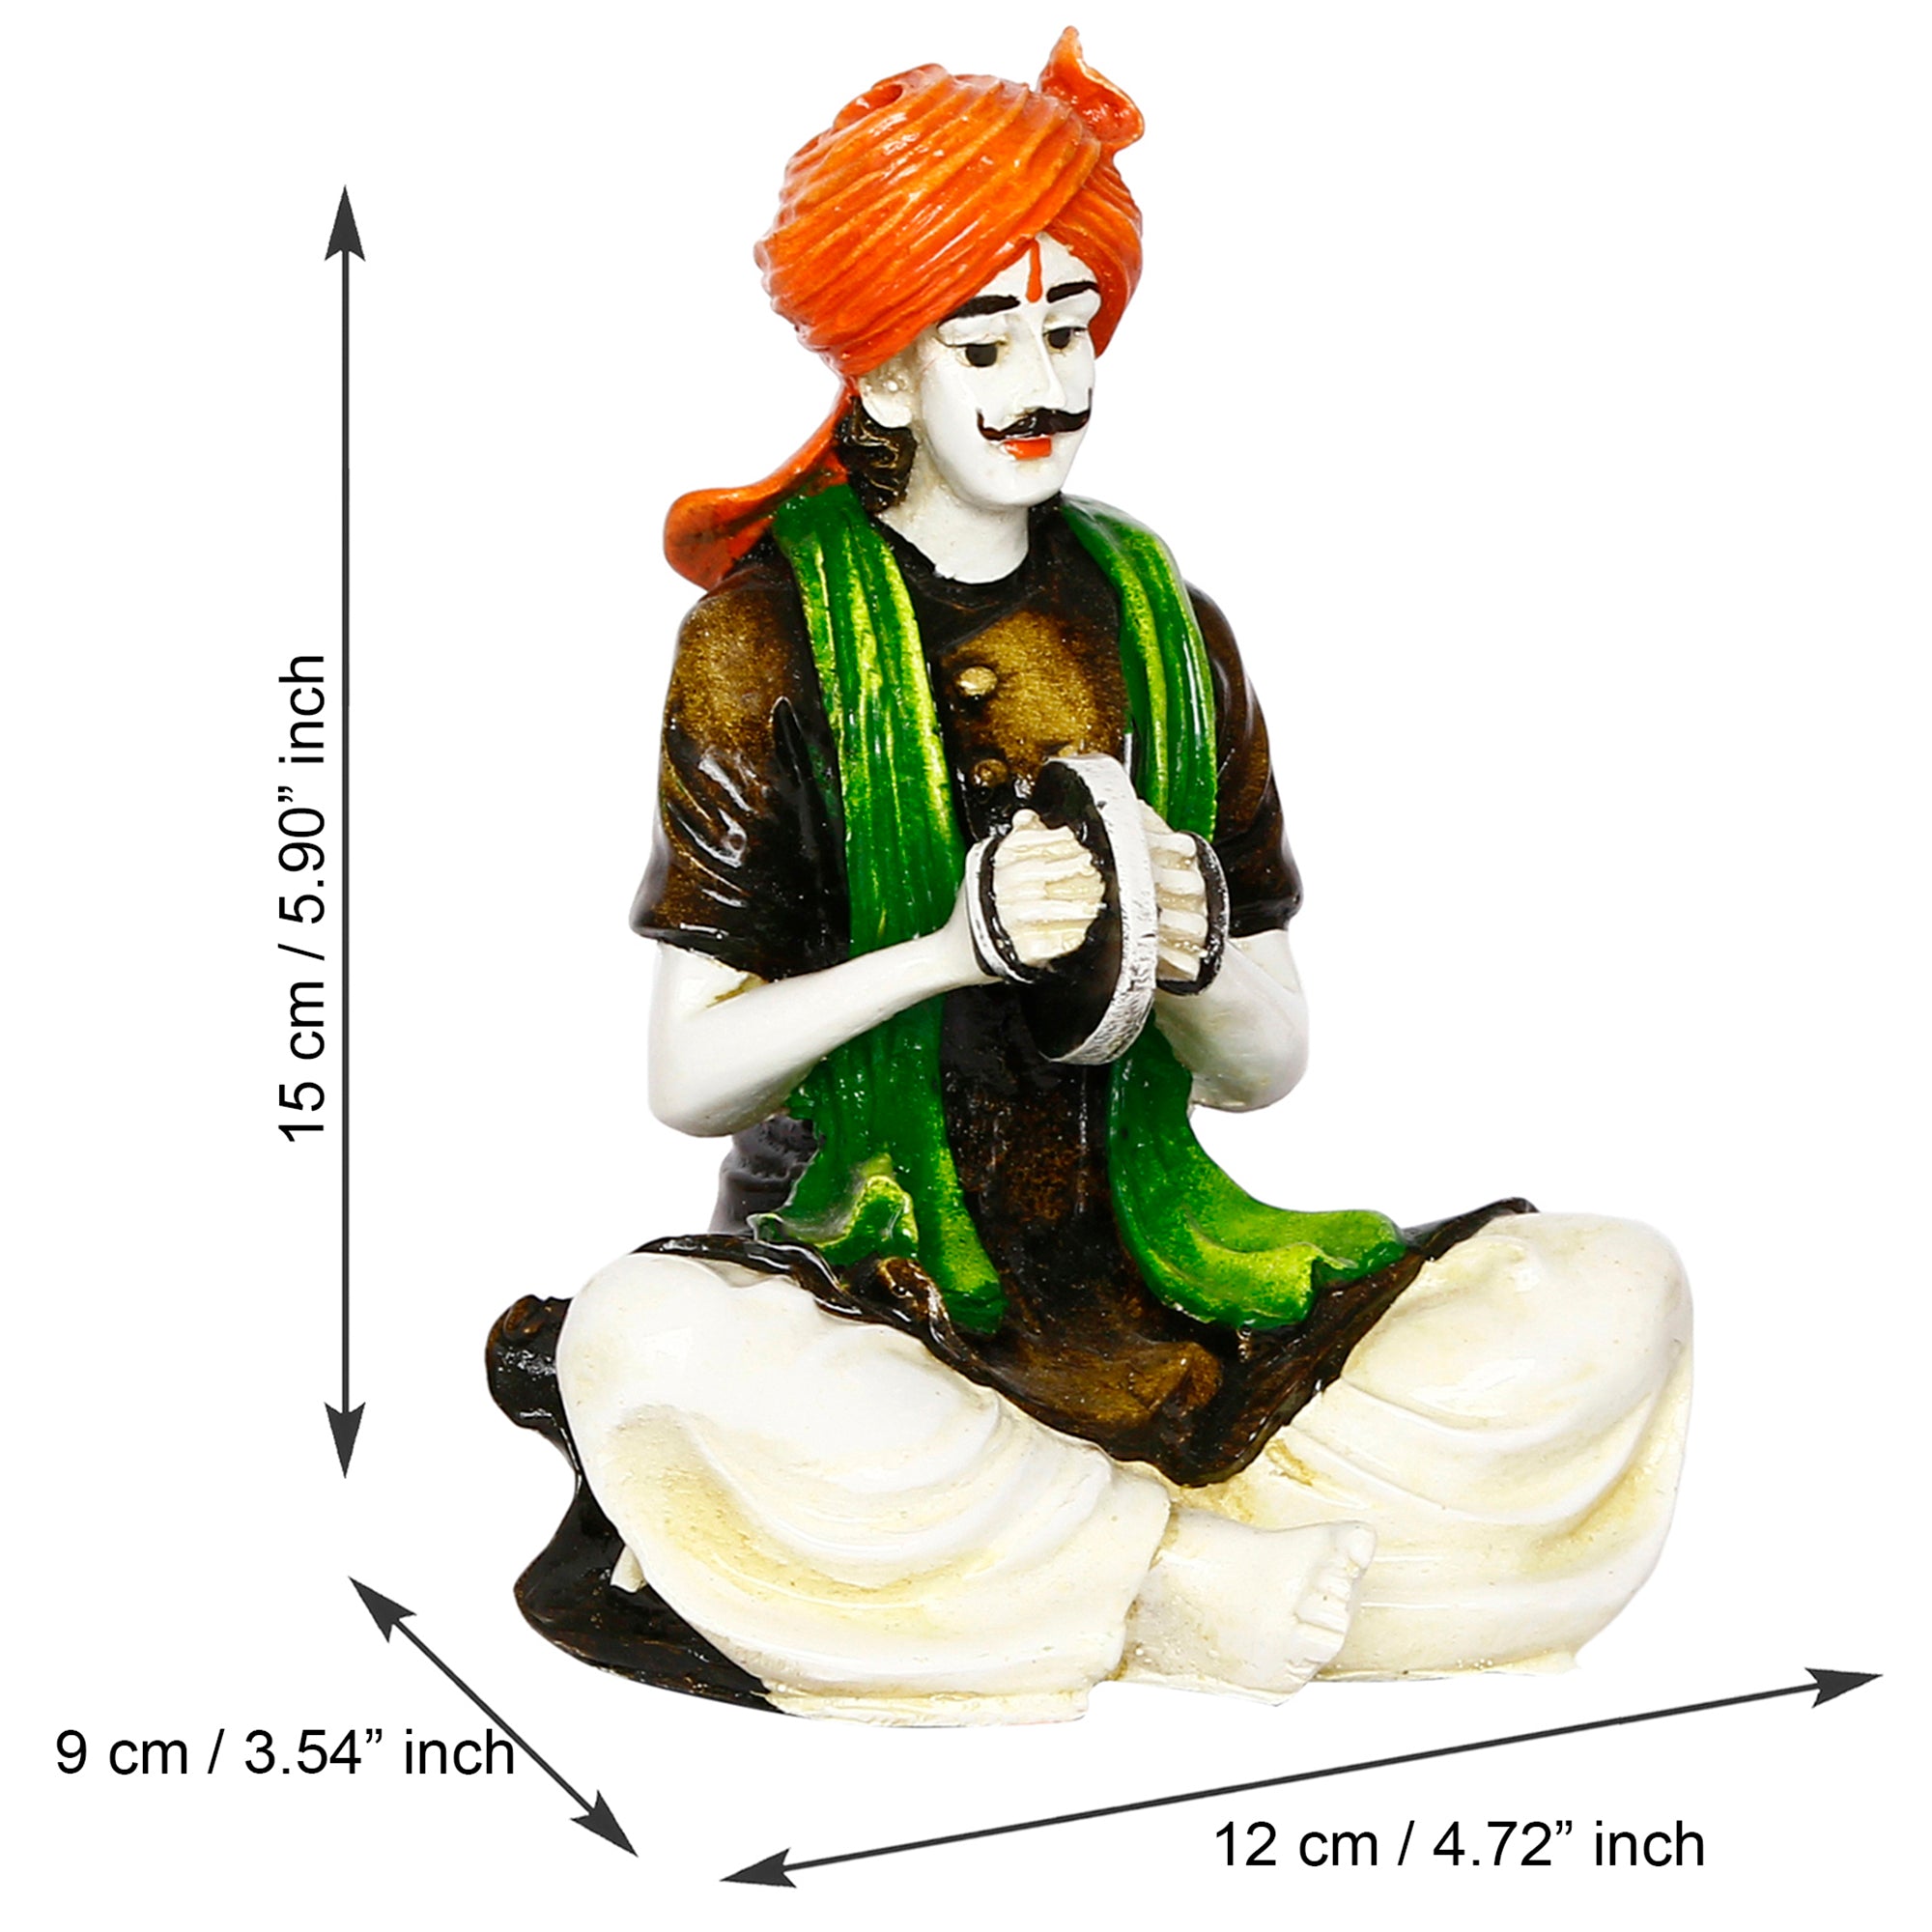 Colorful Rajasthani Man Playing Musical Instrument Handcrafted Decorative Polyresin Showpiece 3